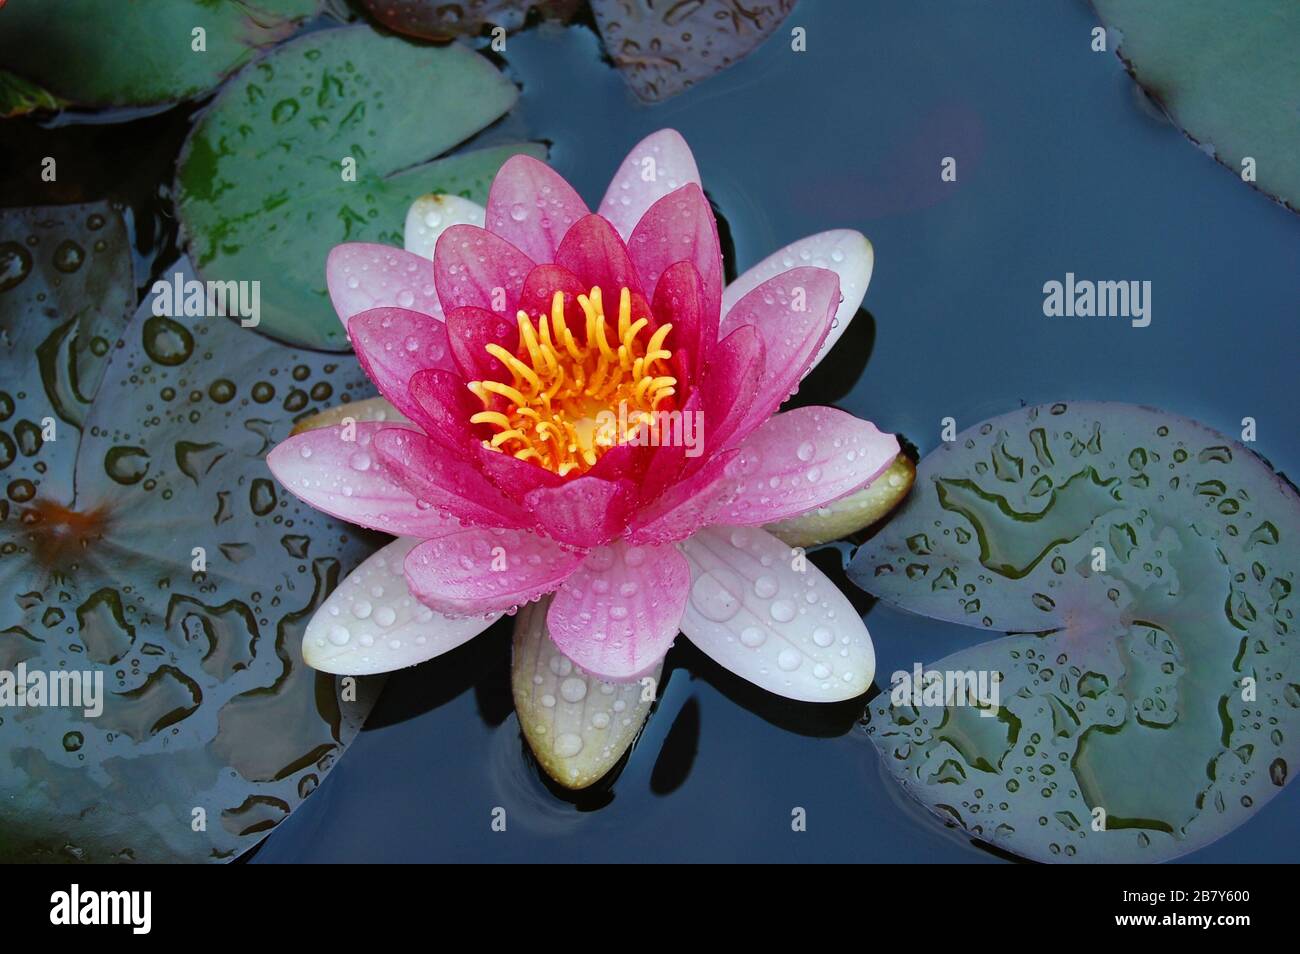 Pink/white waterlily in a garden pond, covered with water drops and surrounded by green water leaves.The Latin name for waterlily is nymphaea. Stock Photo